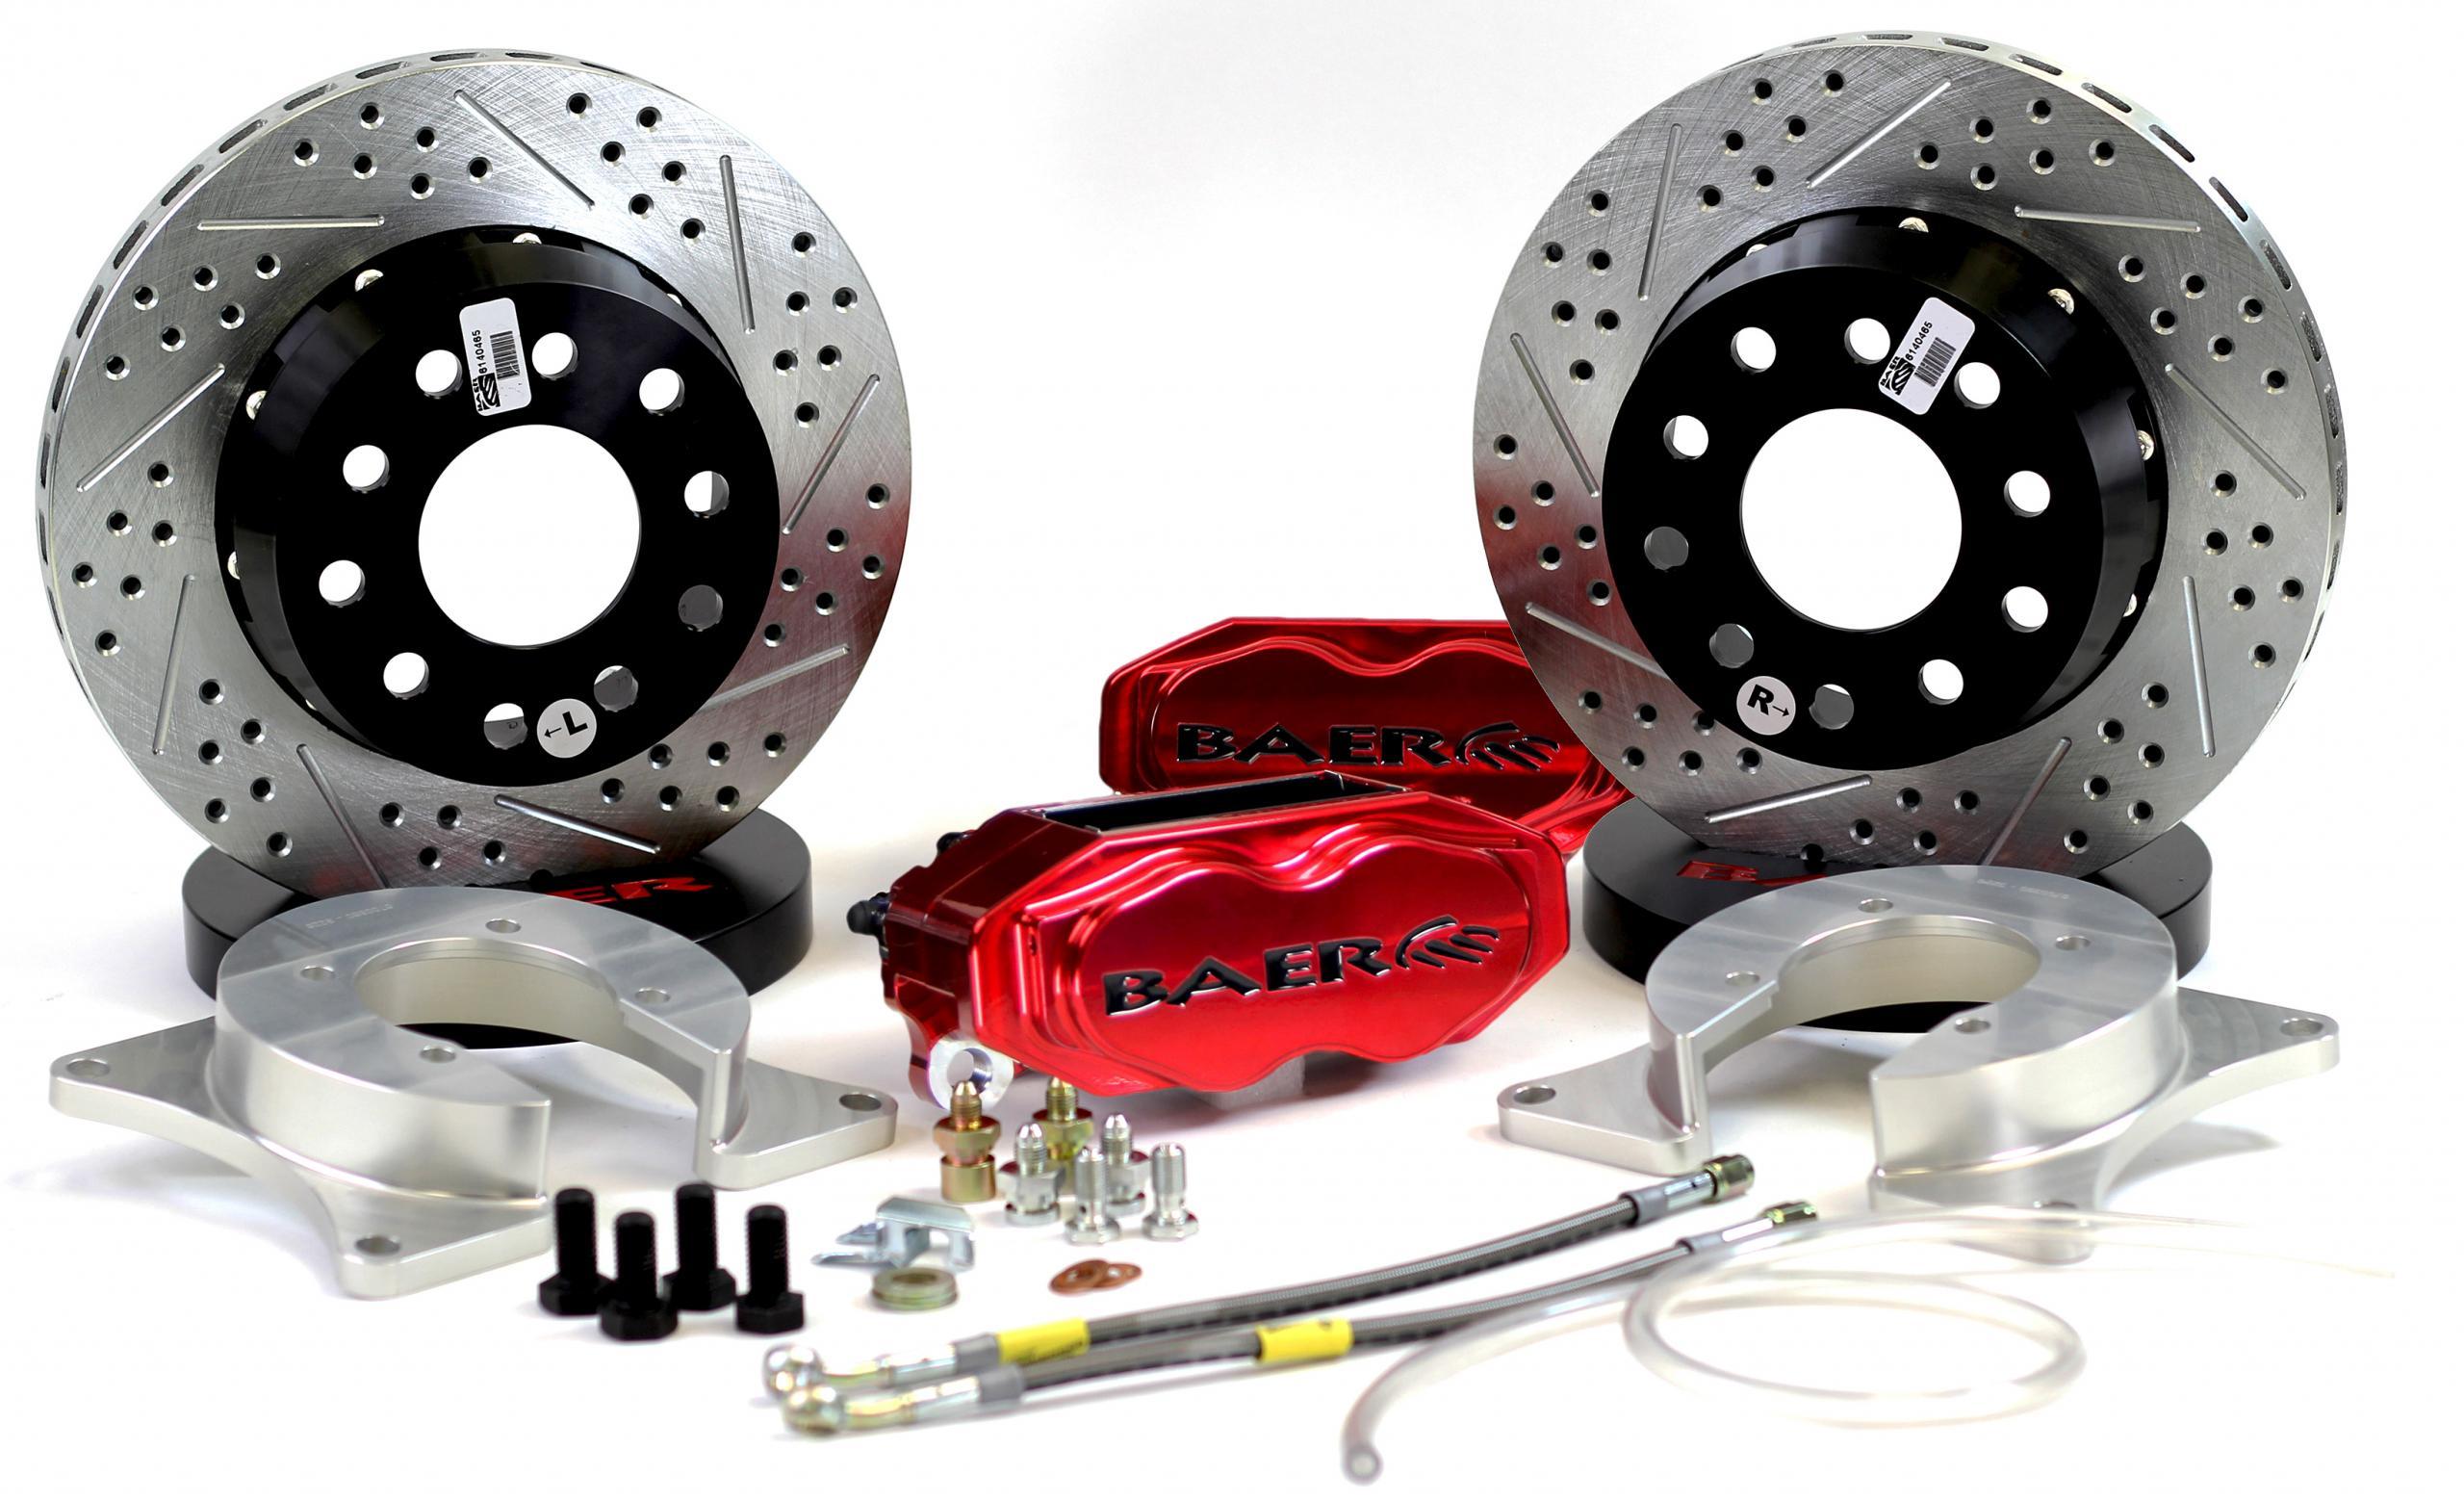 Baer Brakes 4262695FR - Brake System, SS4 Plus, Rear, 4 Piston Caliper, 11.62 in Drilled / Slotted, 2 Piece Rotor, Aluminum, Red, Ford Mustang 2015-18, Kit